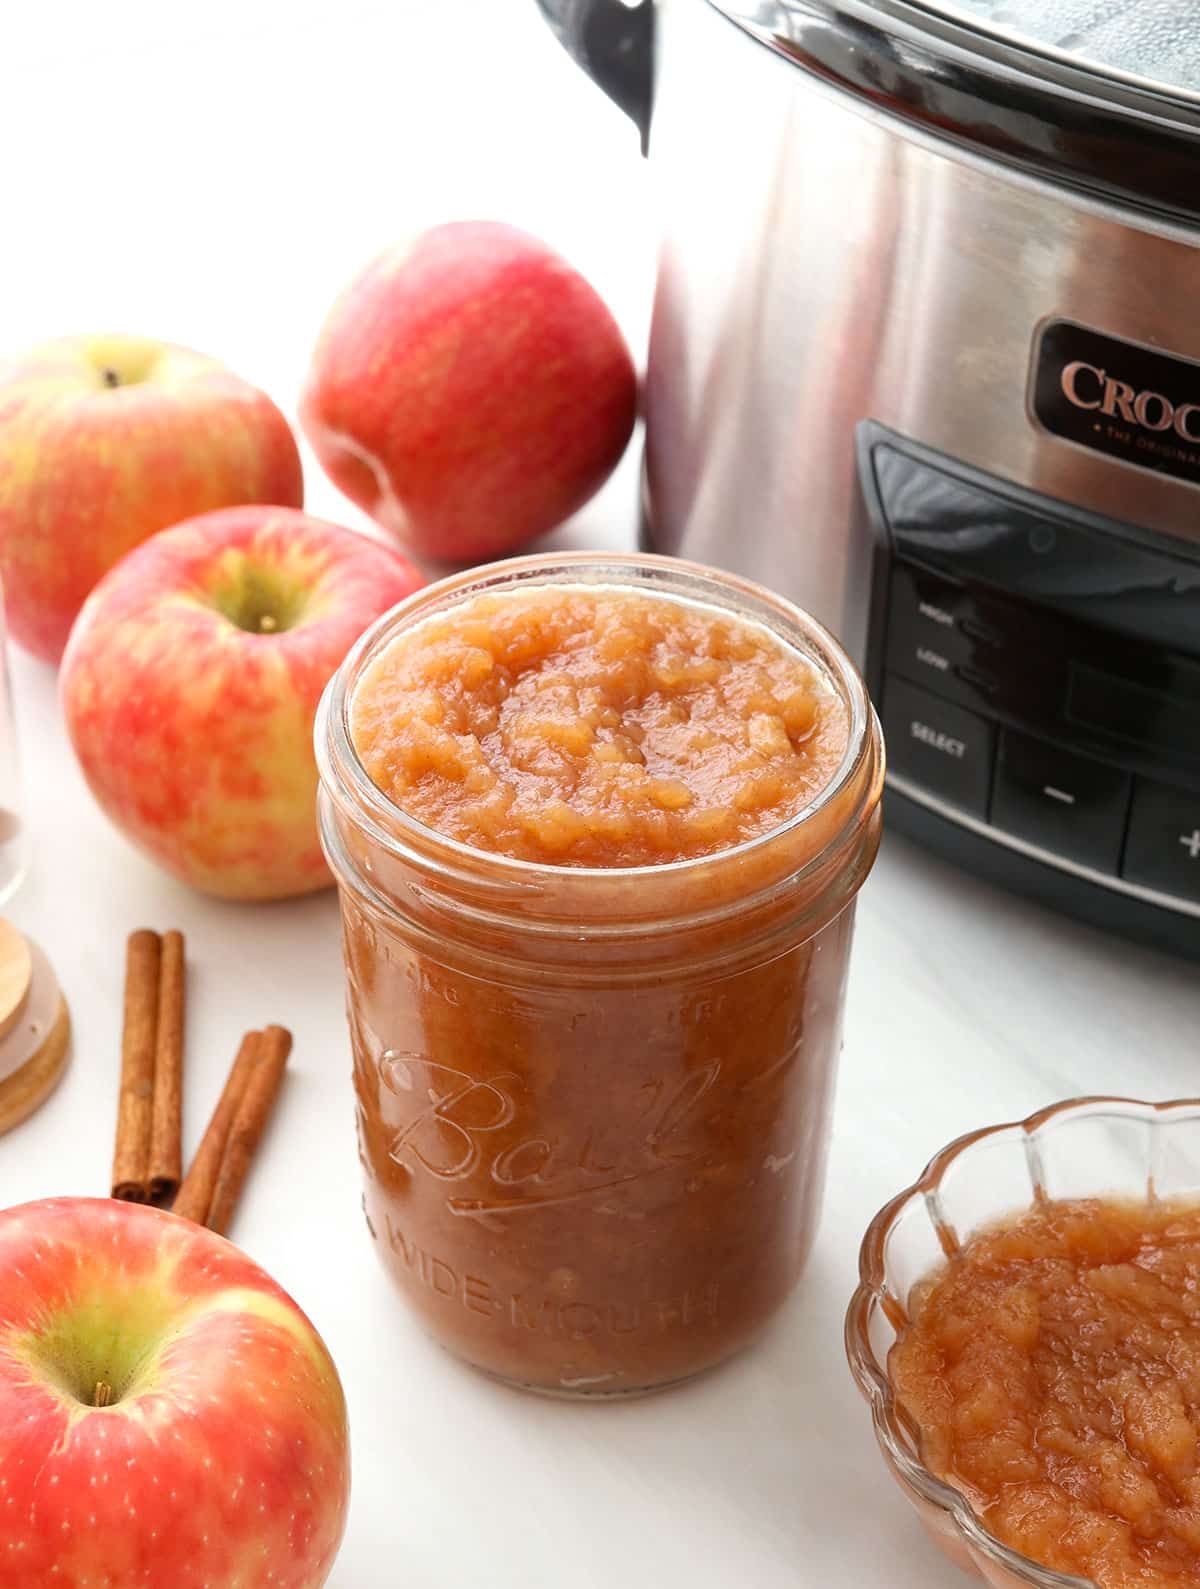 slow cooker applesauce stored in a glass jar near apples.